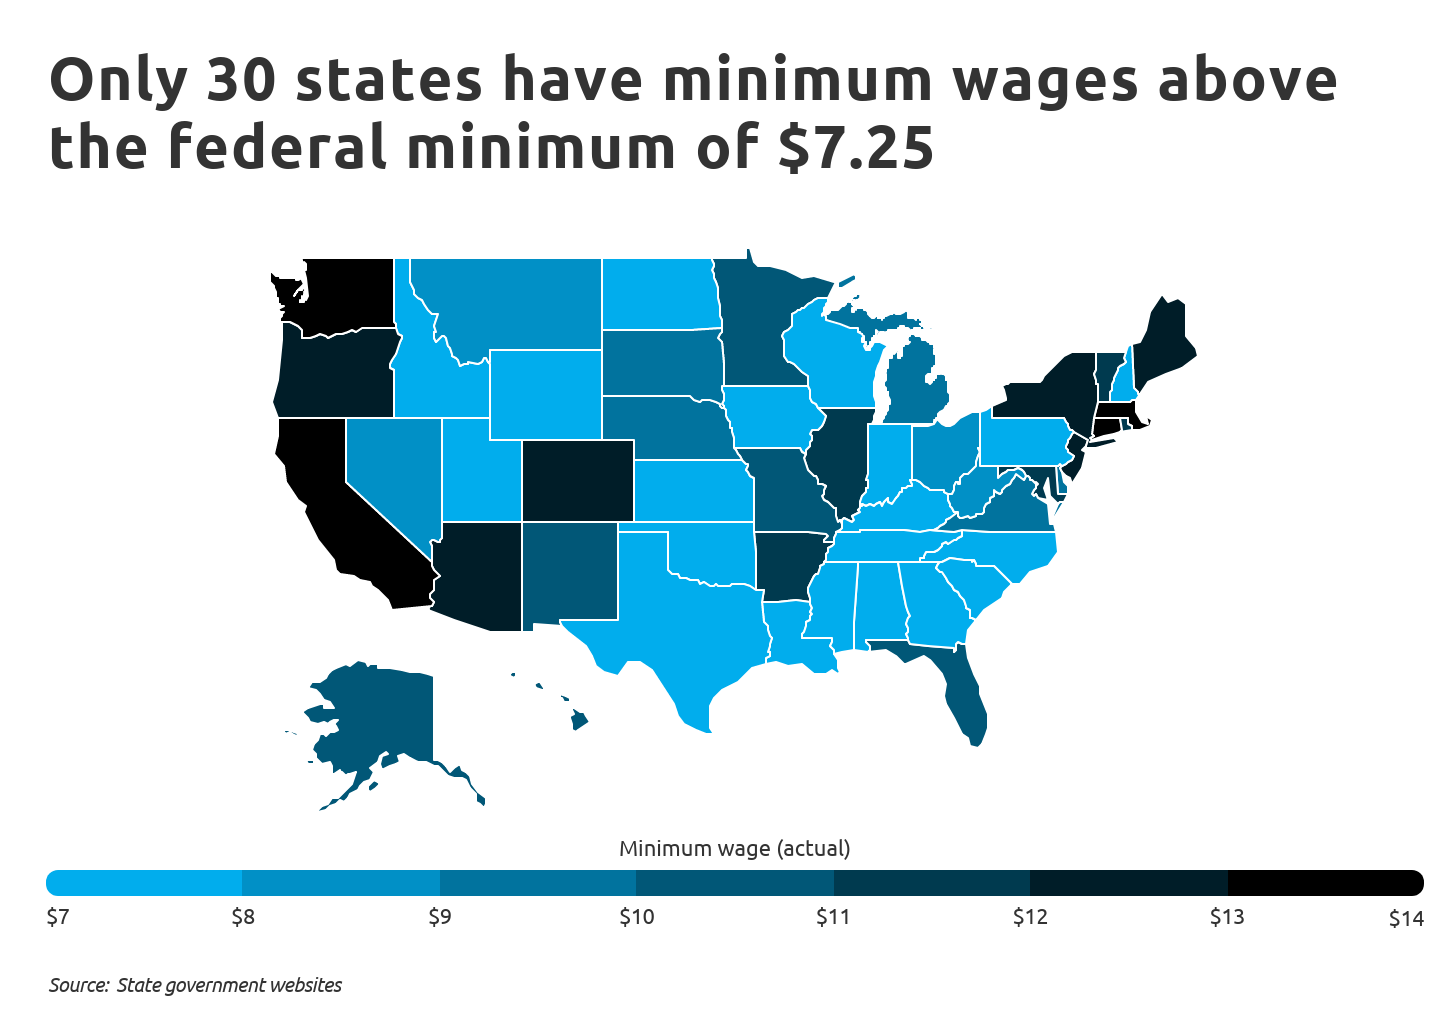 Only 30 states have minimum wages above the federal minimum of $7.25